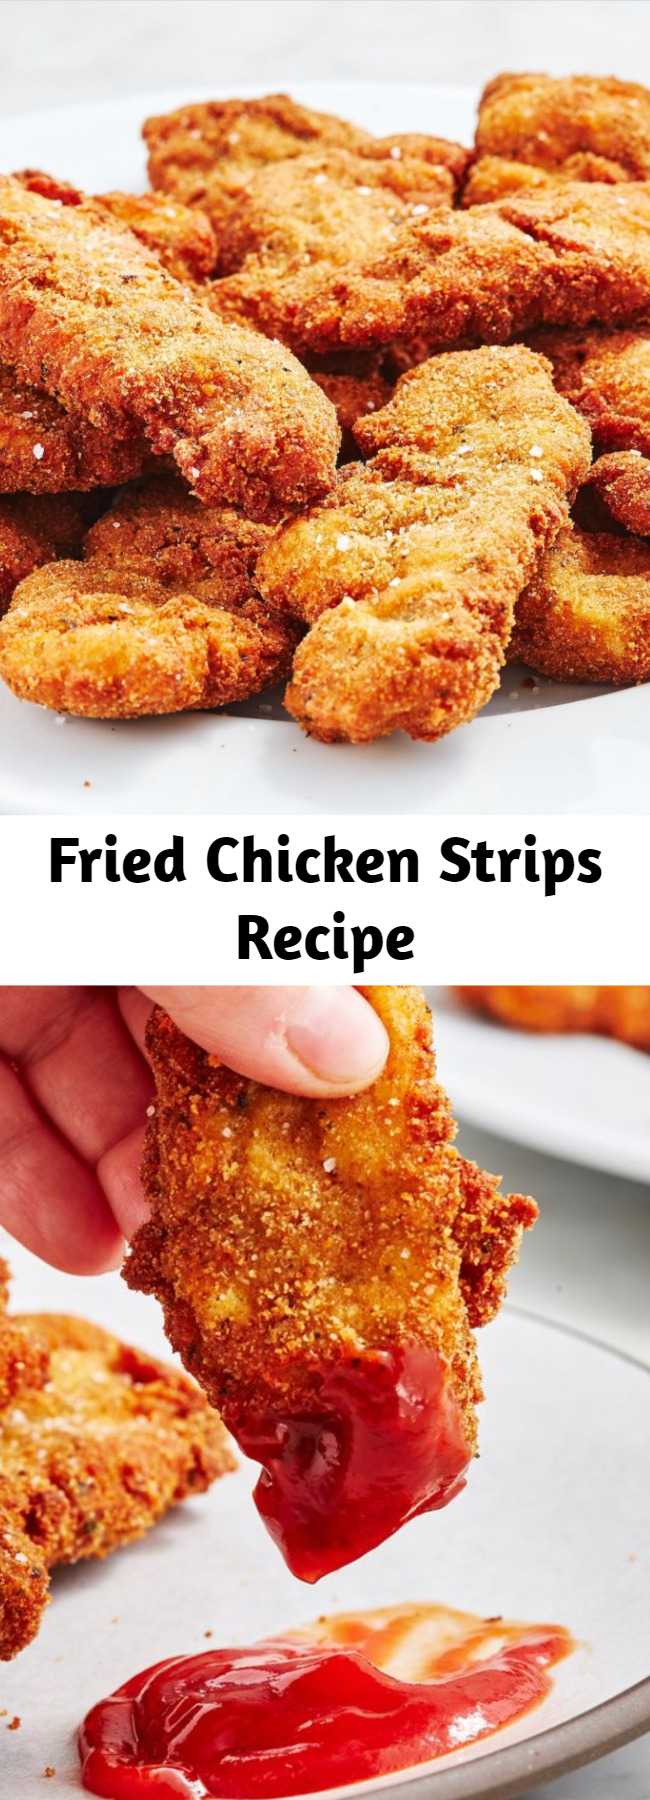 Fried Chicken Strips Recipe - Ahh fried chicken strips take us right back to our childhood. This homemade version makes the tenders so much better and is honestly just what makes us feel better about eating them as an adult.